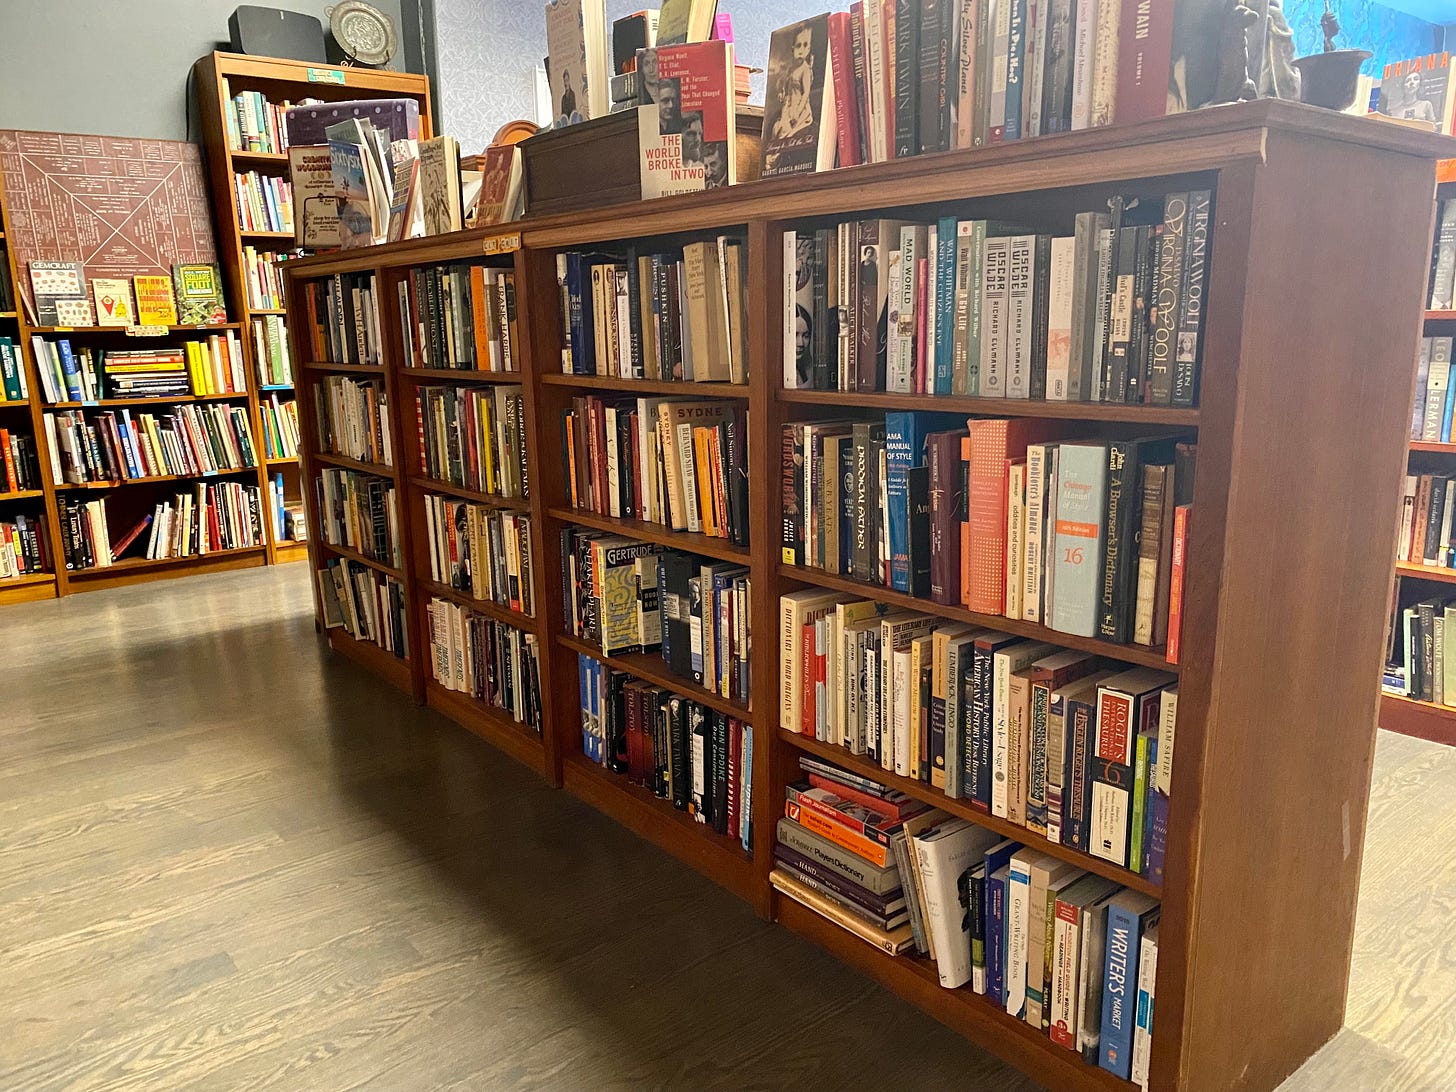 A long, low full bookcase, the contents of which are described below